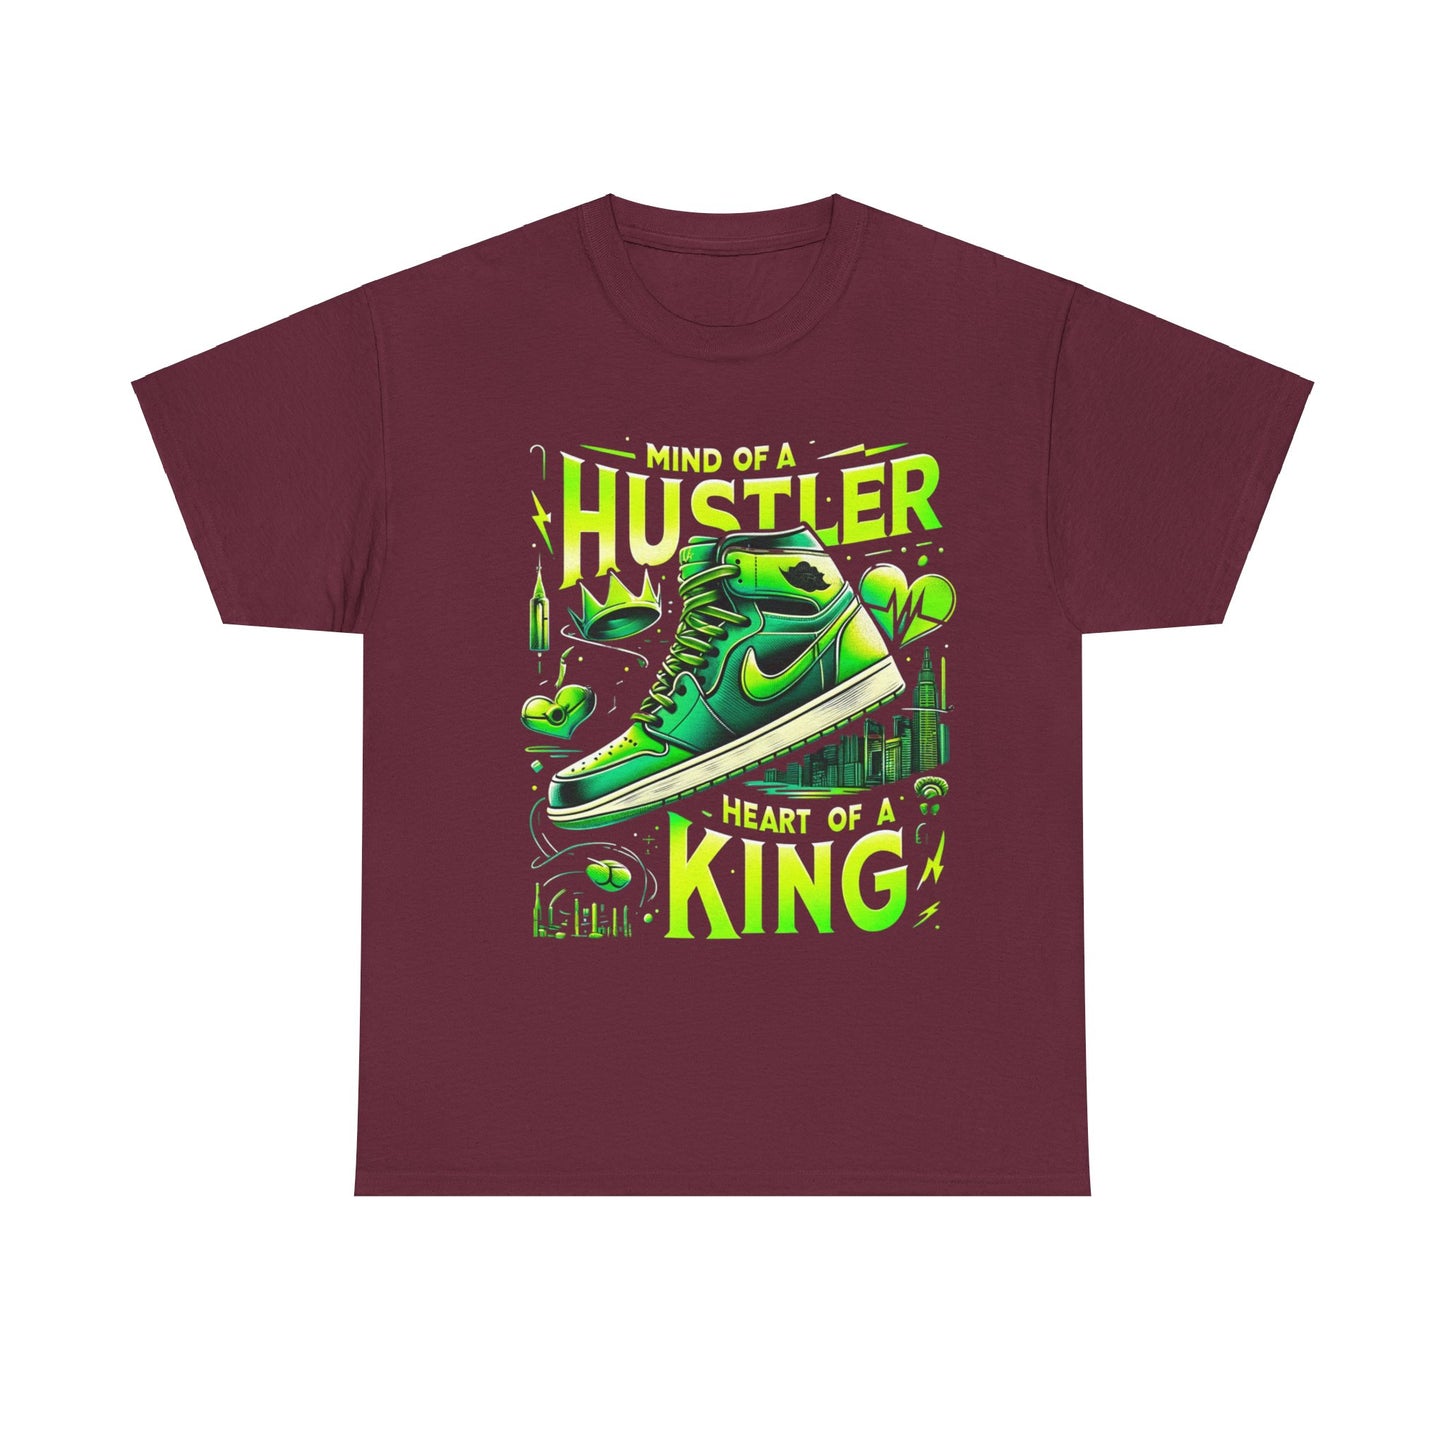 "Mind of a Hustler Heart of a King" Tee - Green Glow Sneakers